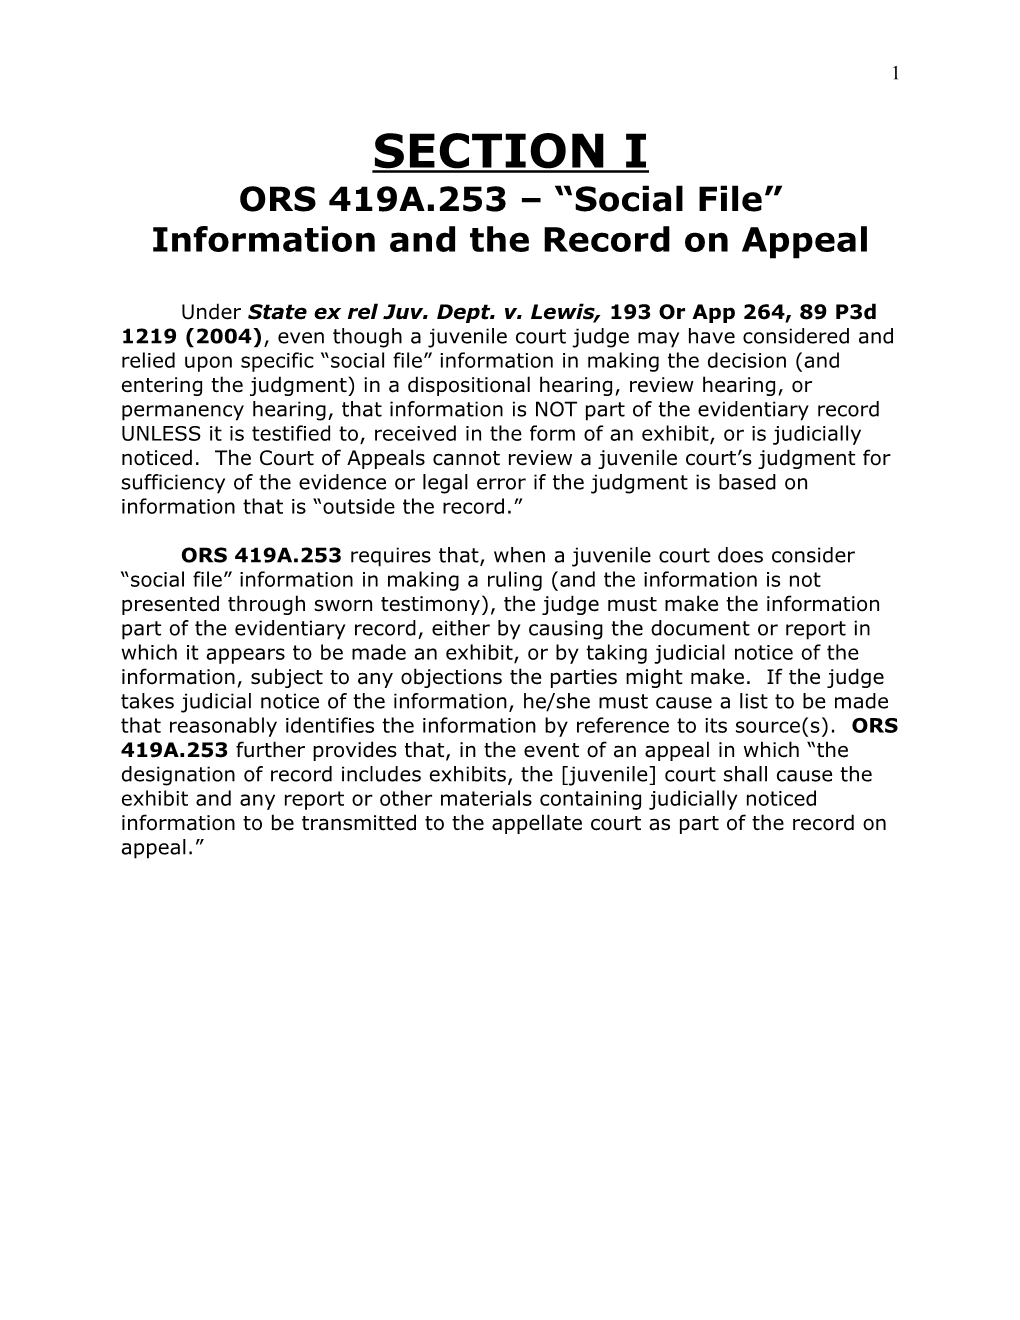 ORS 419A.253 Social File Information and the Record on Appeal